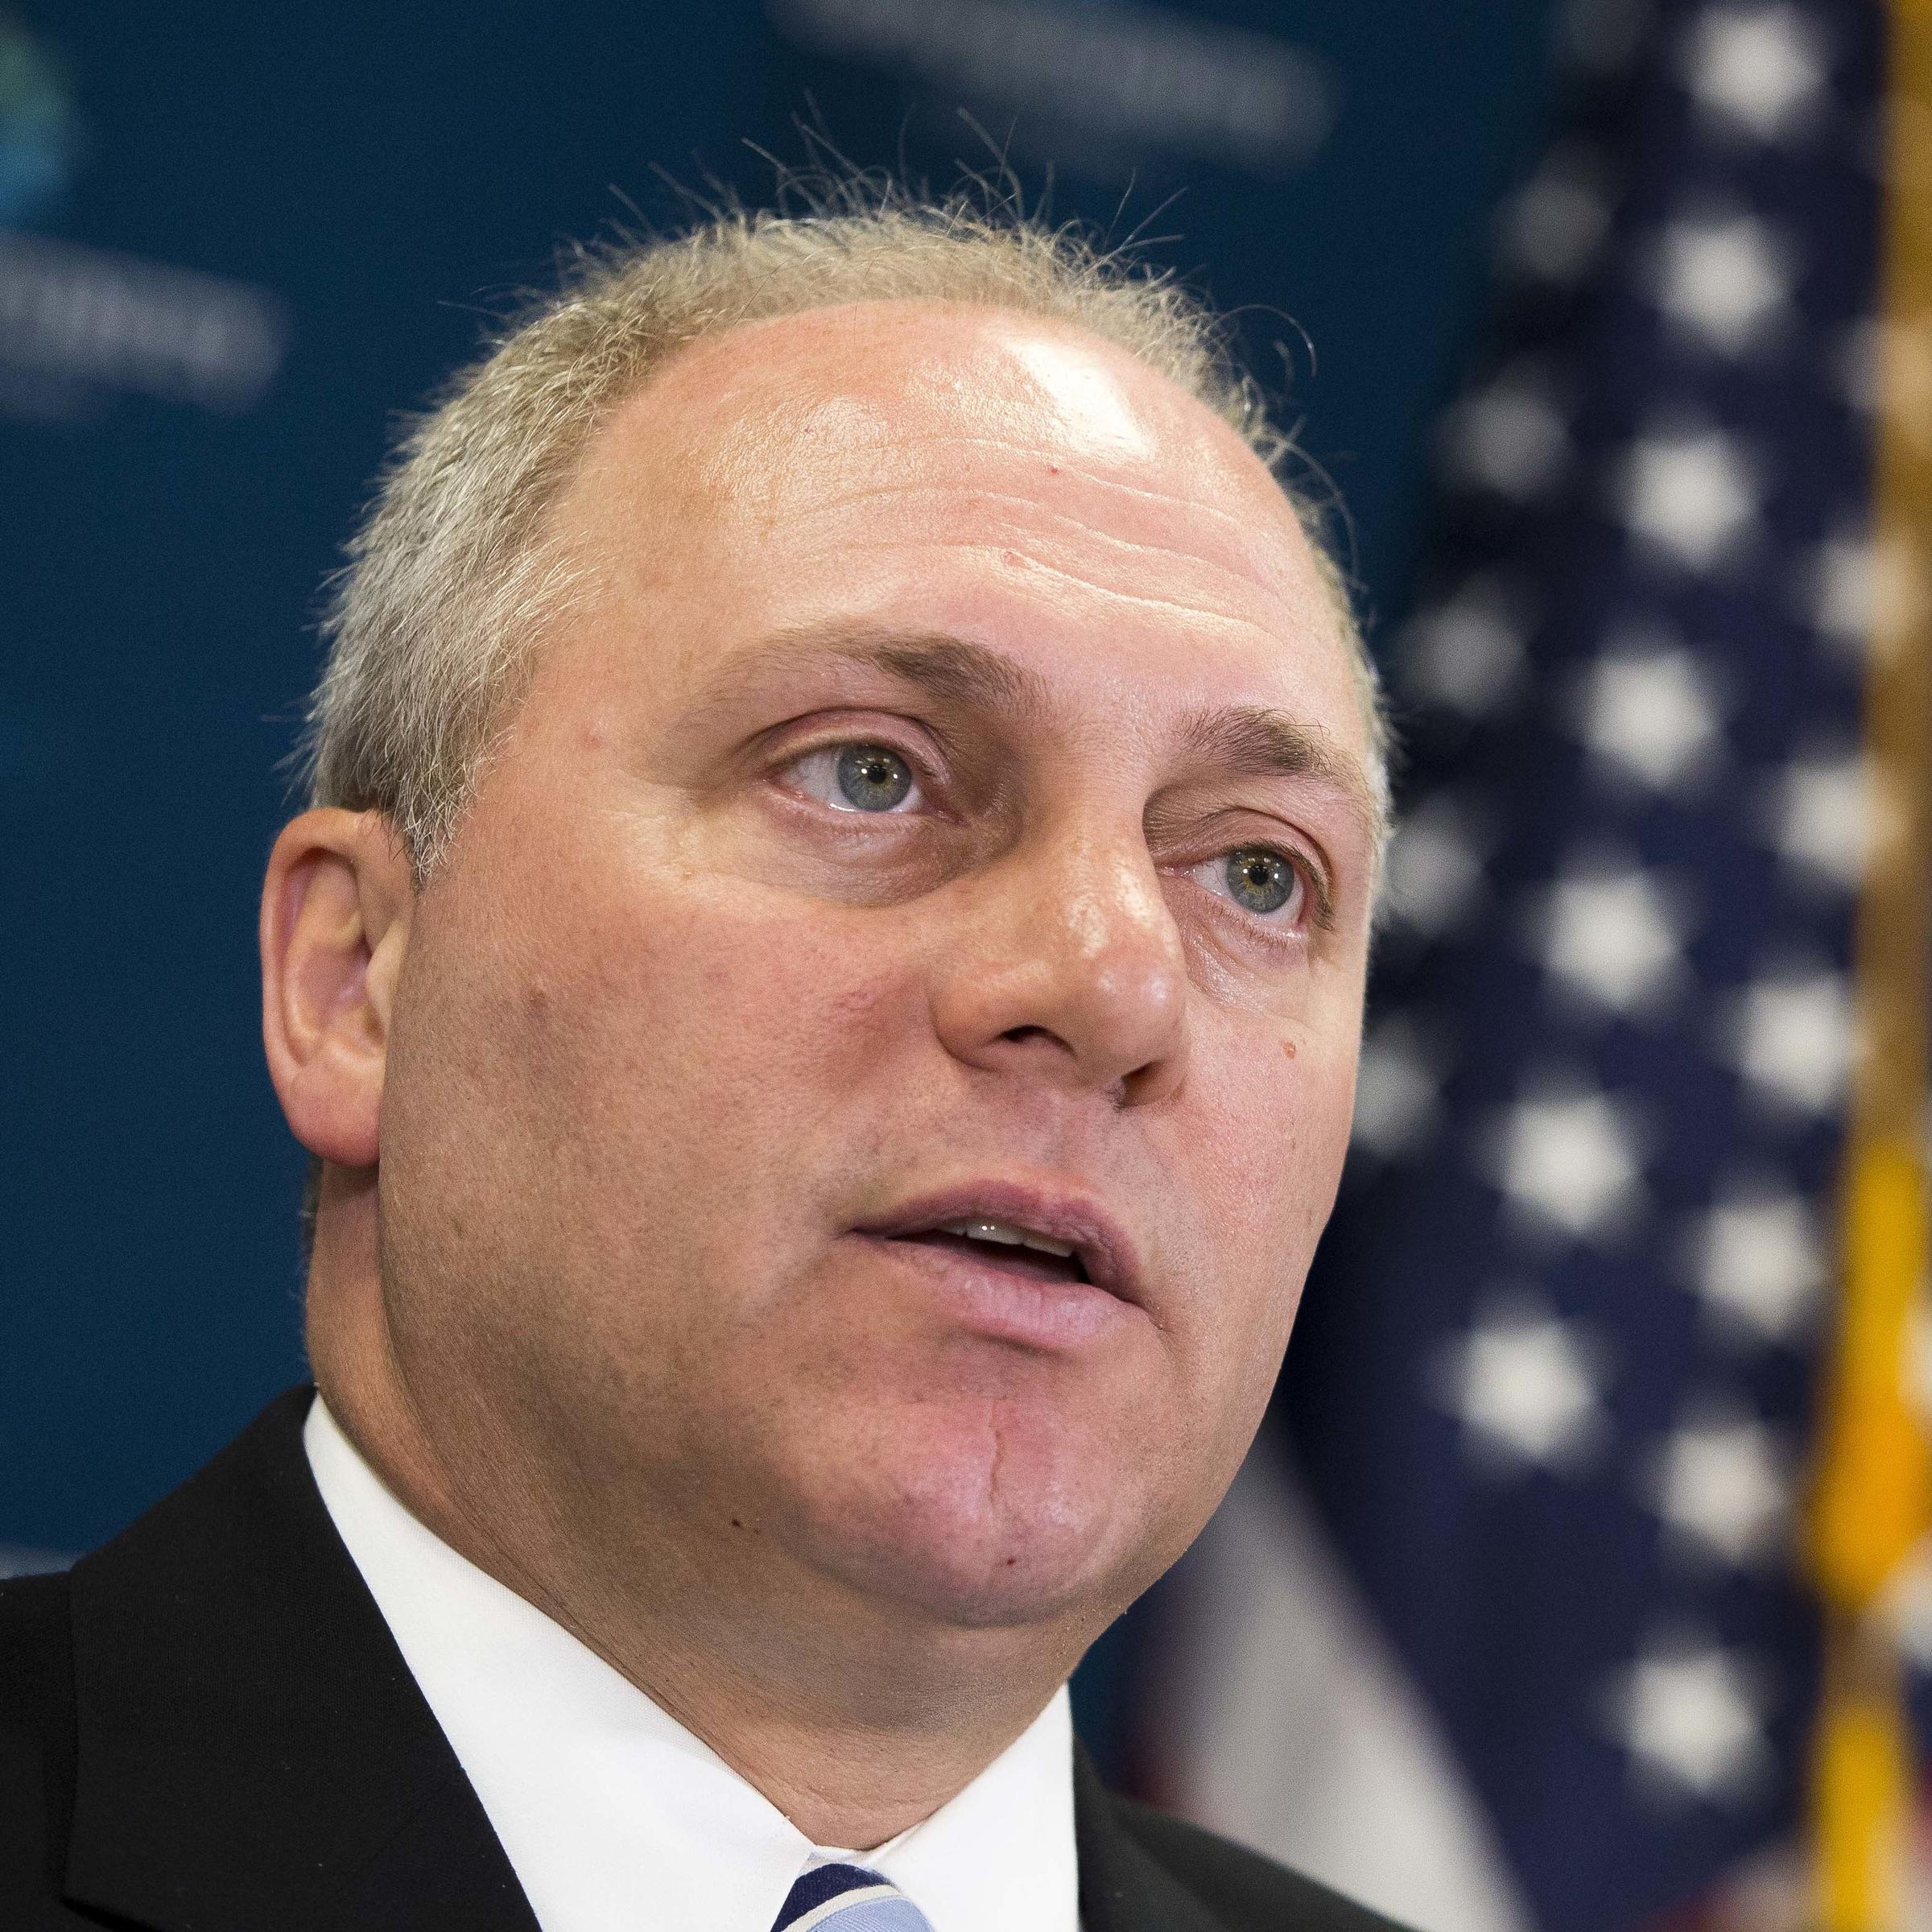 Rep. Steve Scalise Still in Critical Condition, 'Has Improved,' Hospital Officials Say